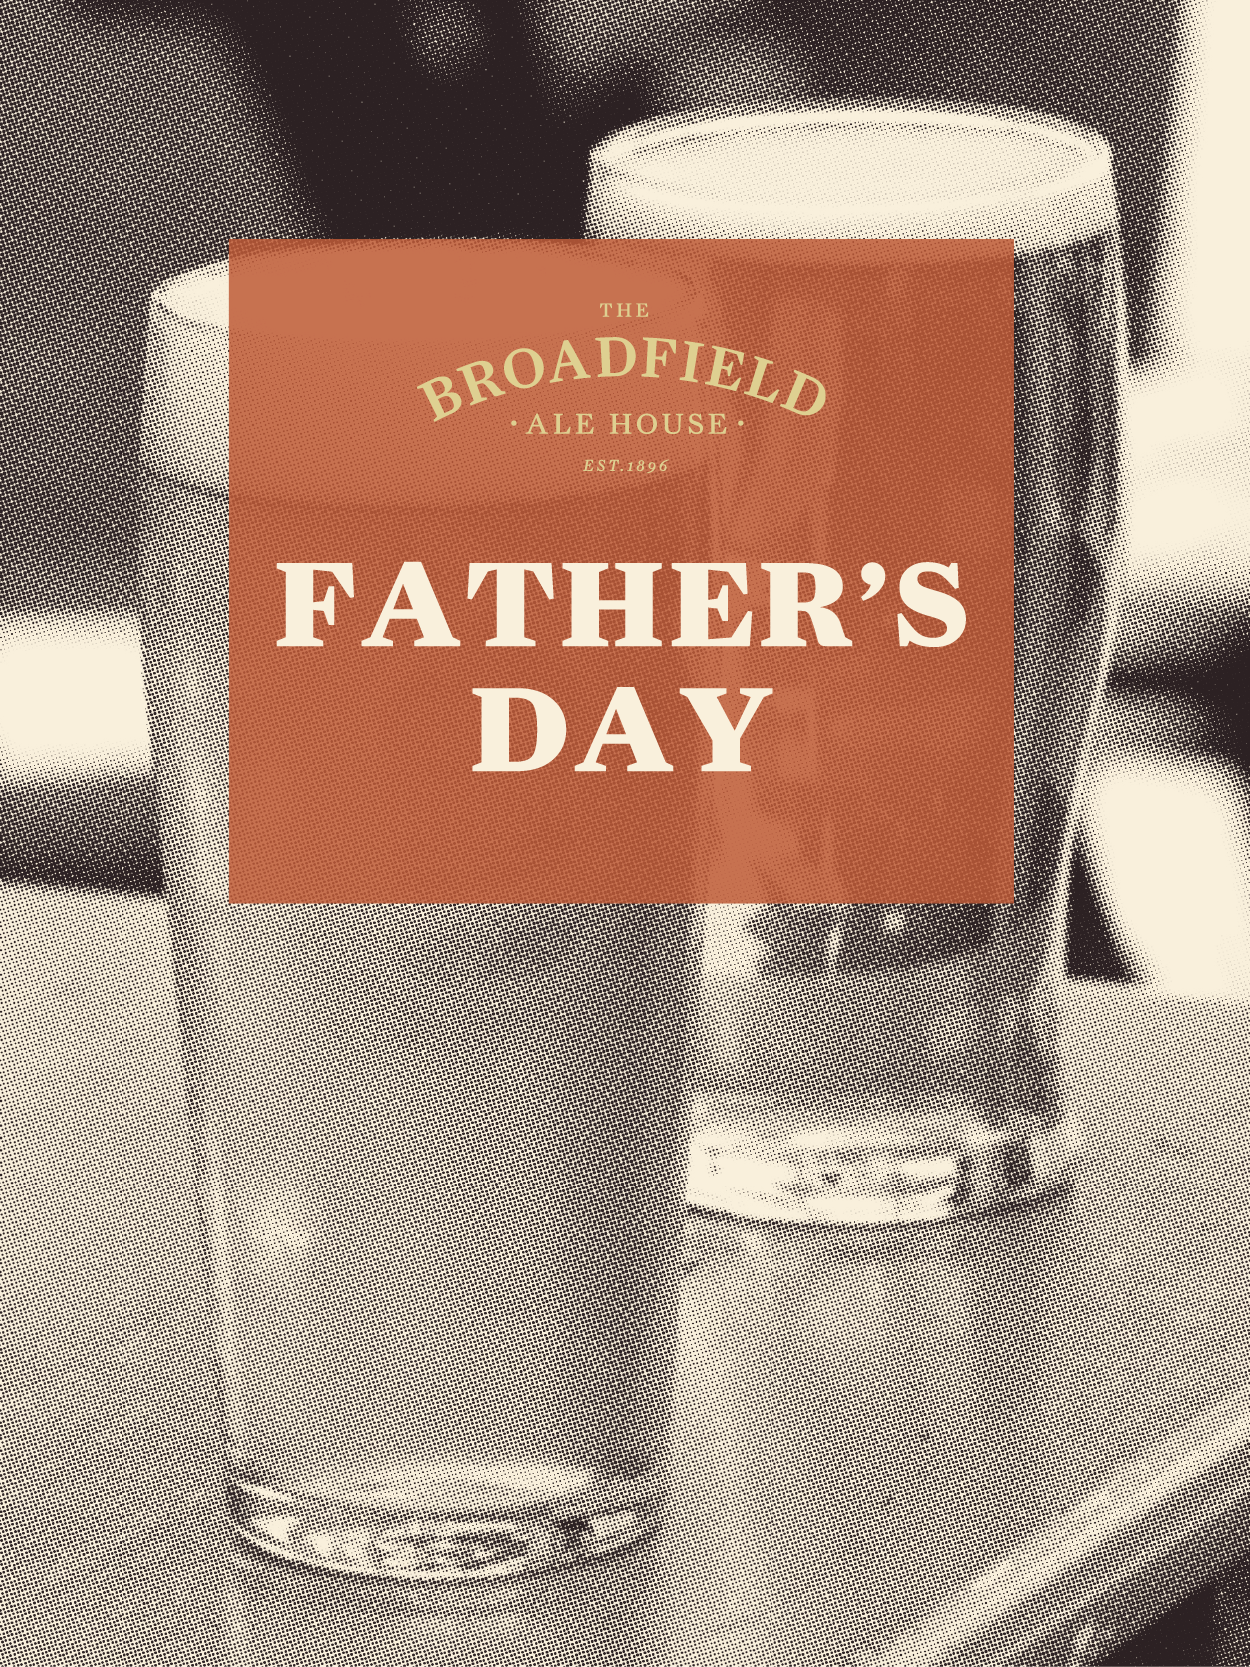 The Broadfield Father's Day